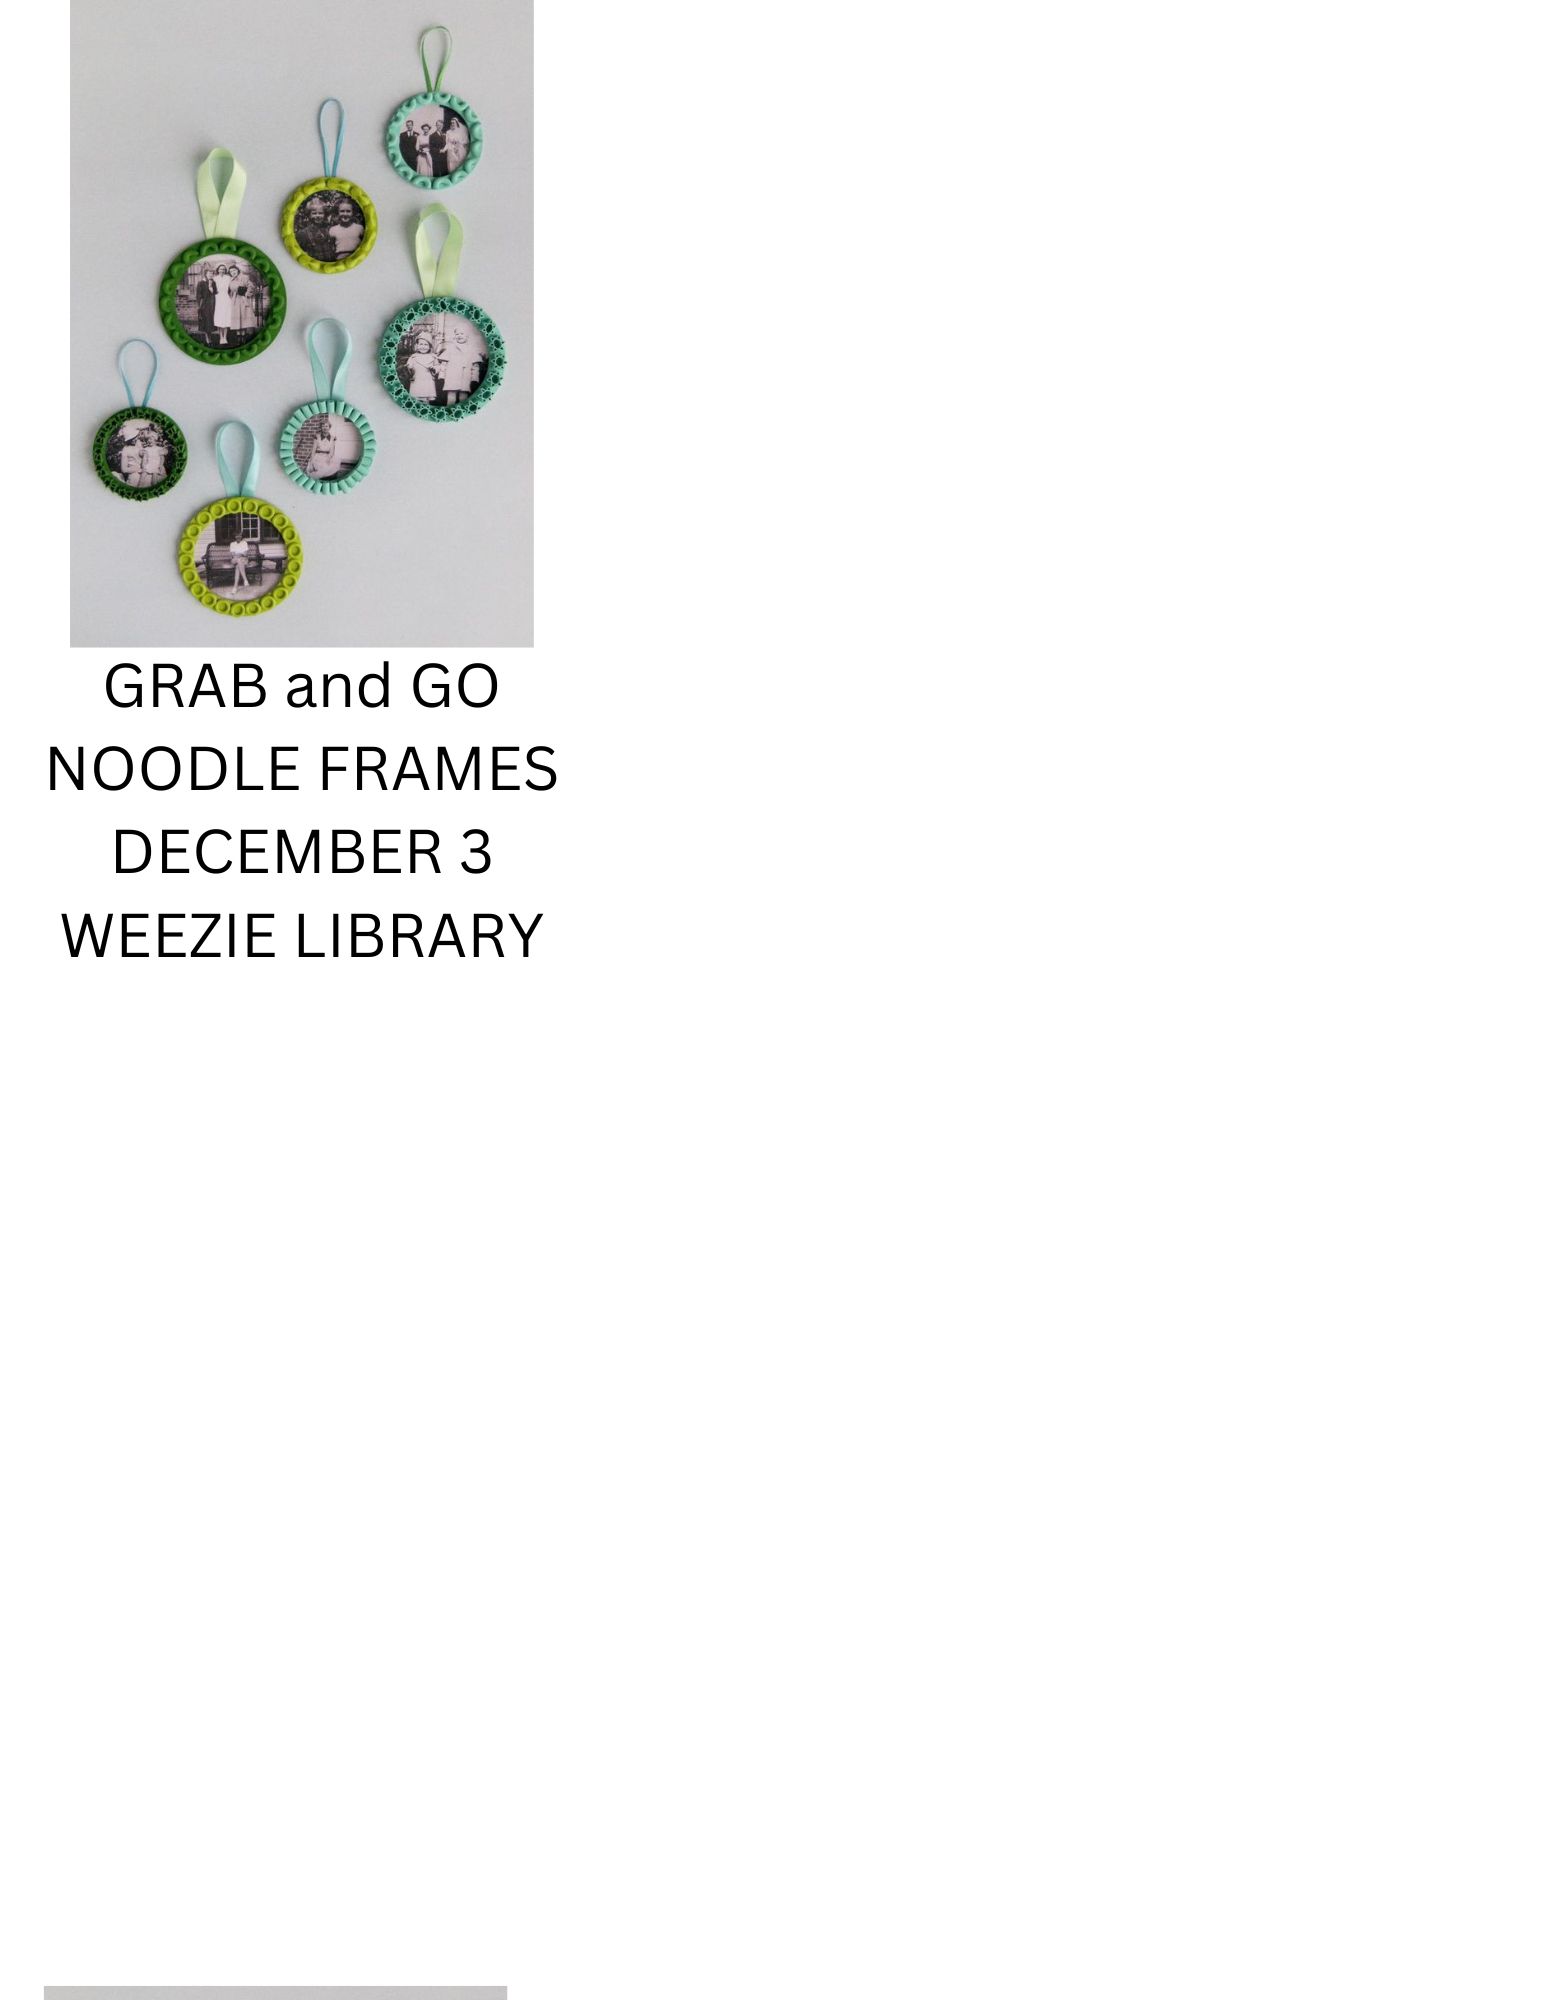 Create some noodle frames with your own photos!